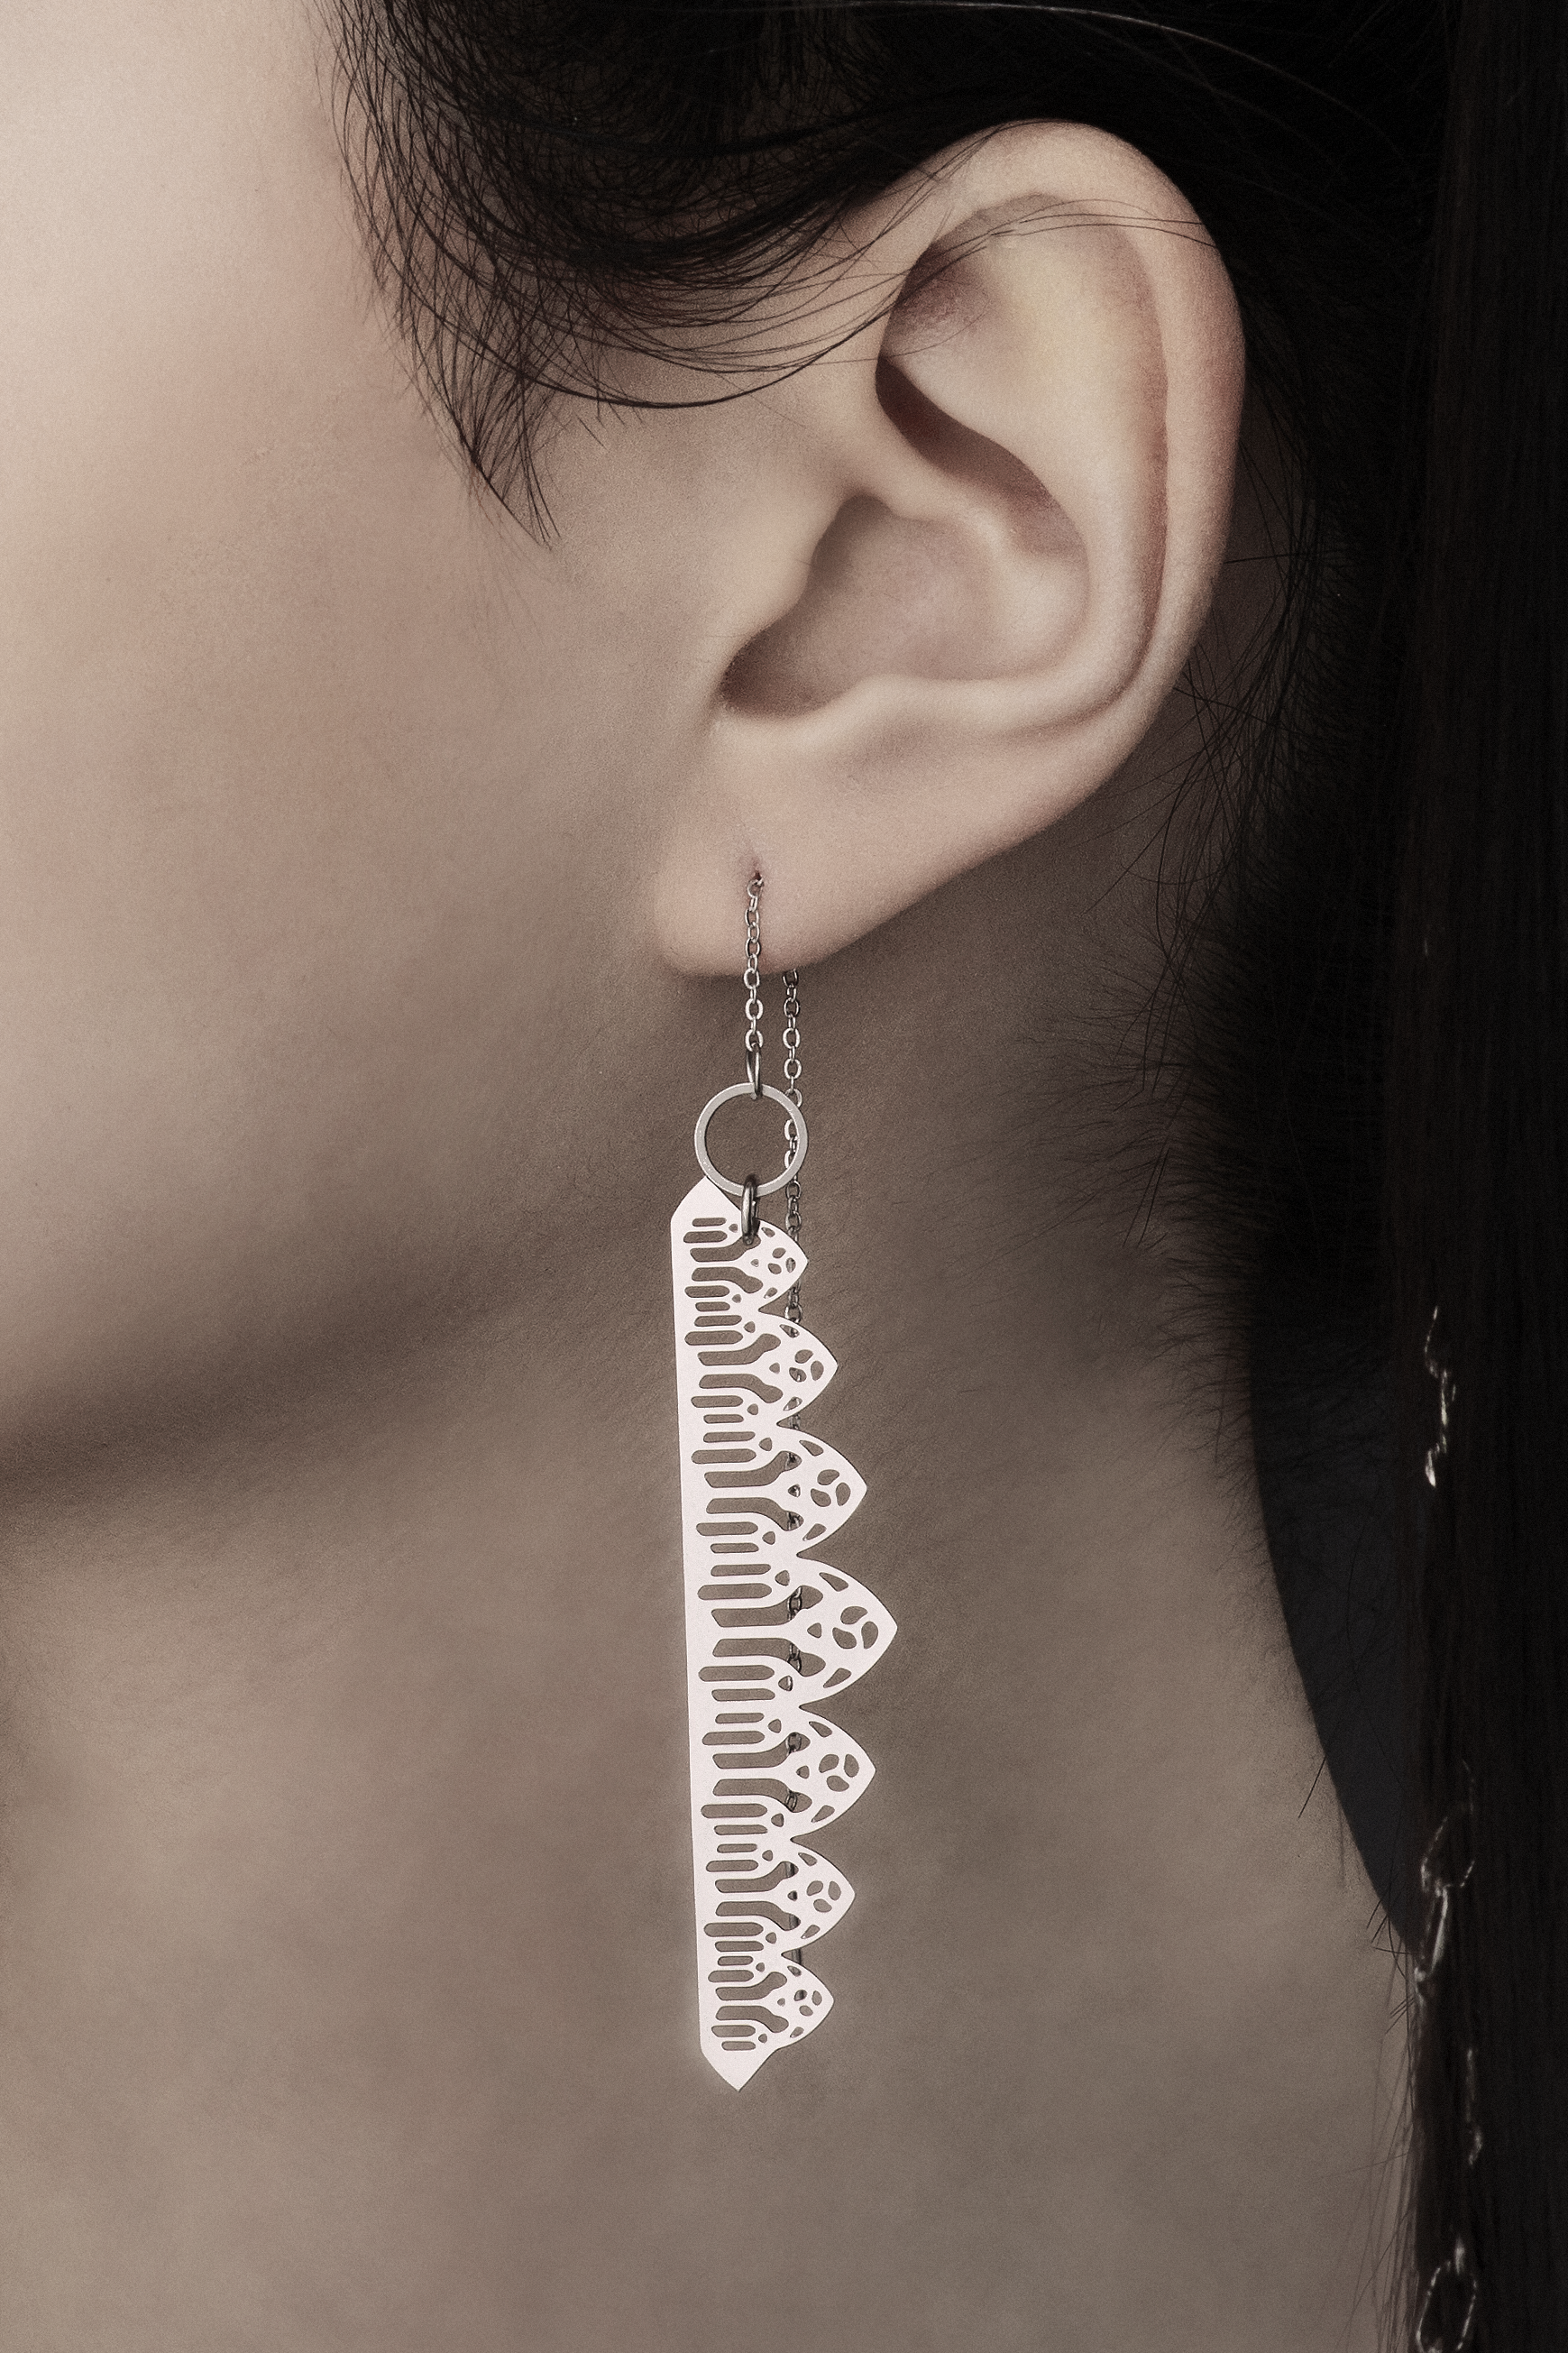 Explore the enigmatic charm of Myril Jewels with this captivating Goth Threader Earring, featuring intricate gothic arches in a filigree design that exudes dark-avantgarde elegance. Perfect for Halloween, festival wear, or as a striking statement piece in a minimal goth wardrobe, this earring is an ideal gift for the goth girlfriend or friend who adores bold, whimsigoth-inspired jewelry